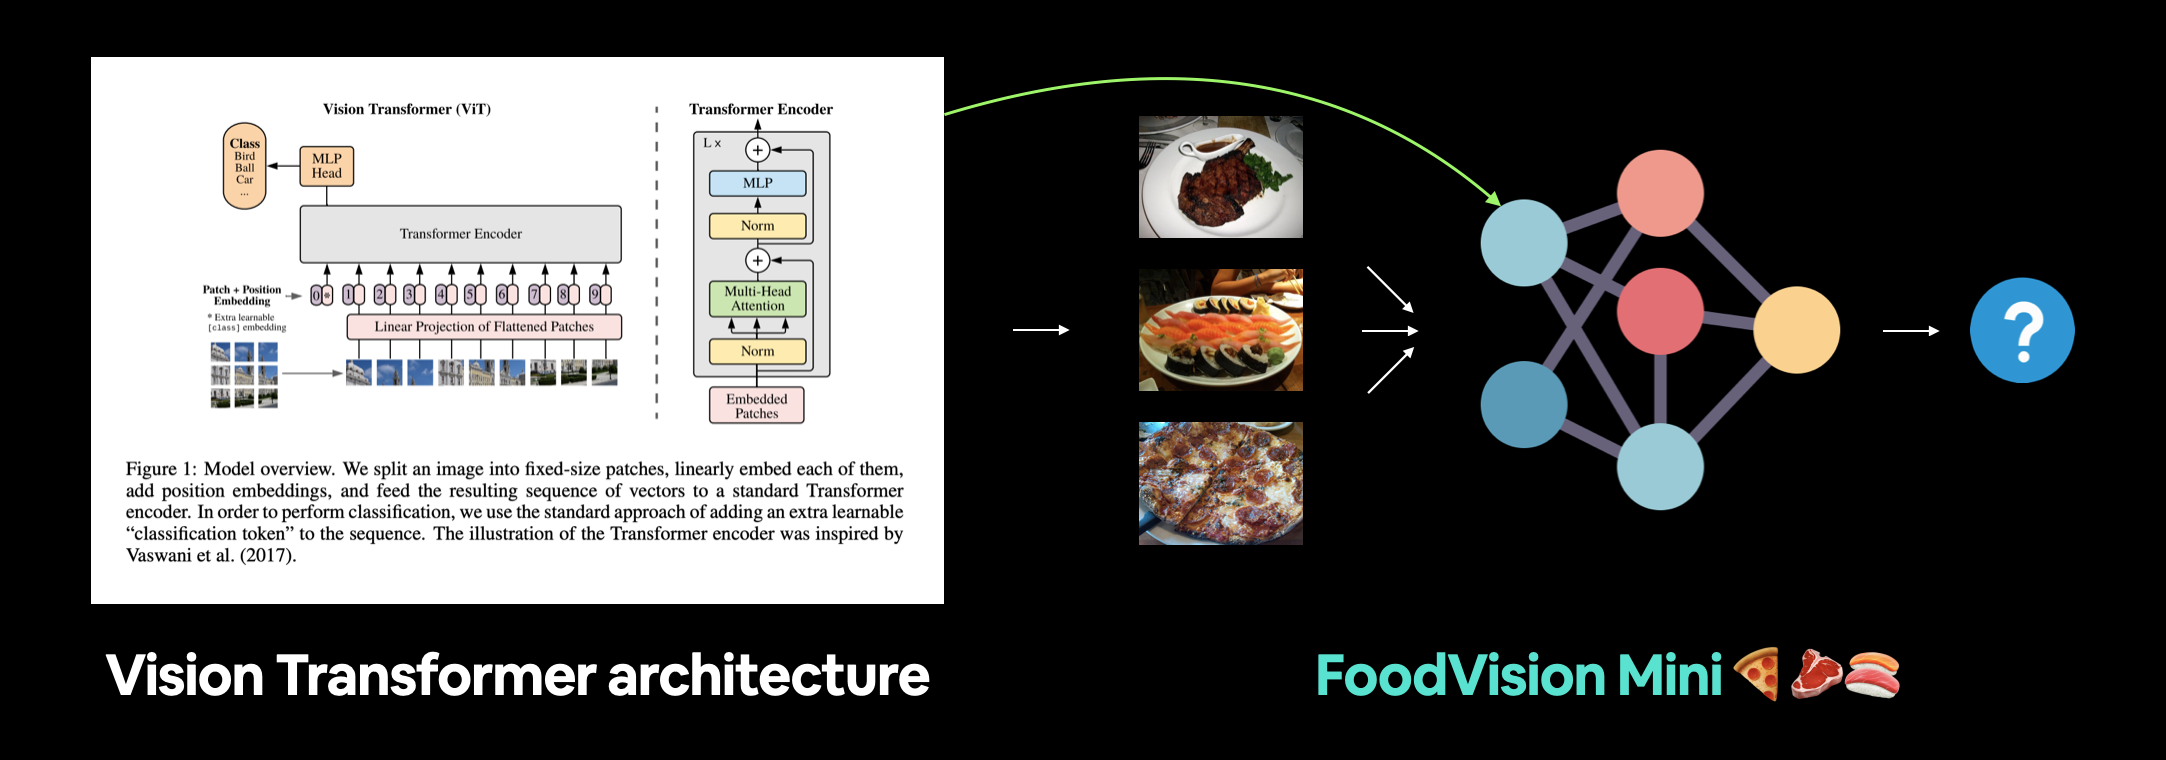 appyling the vision transformer architecture to FoodVision mini